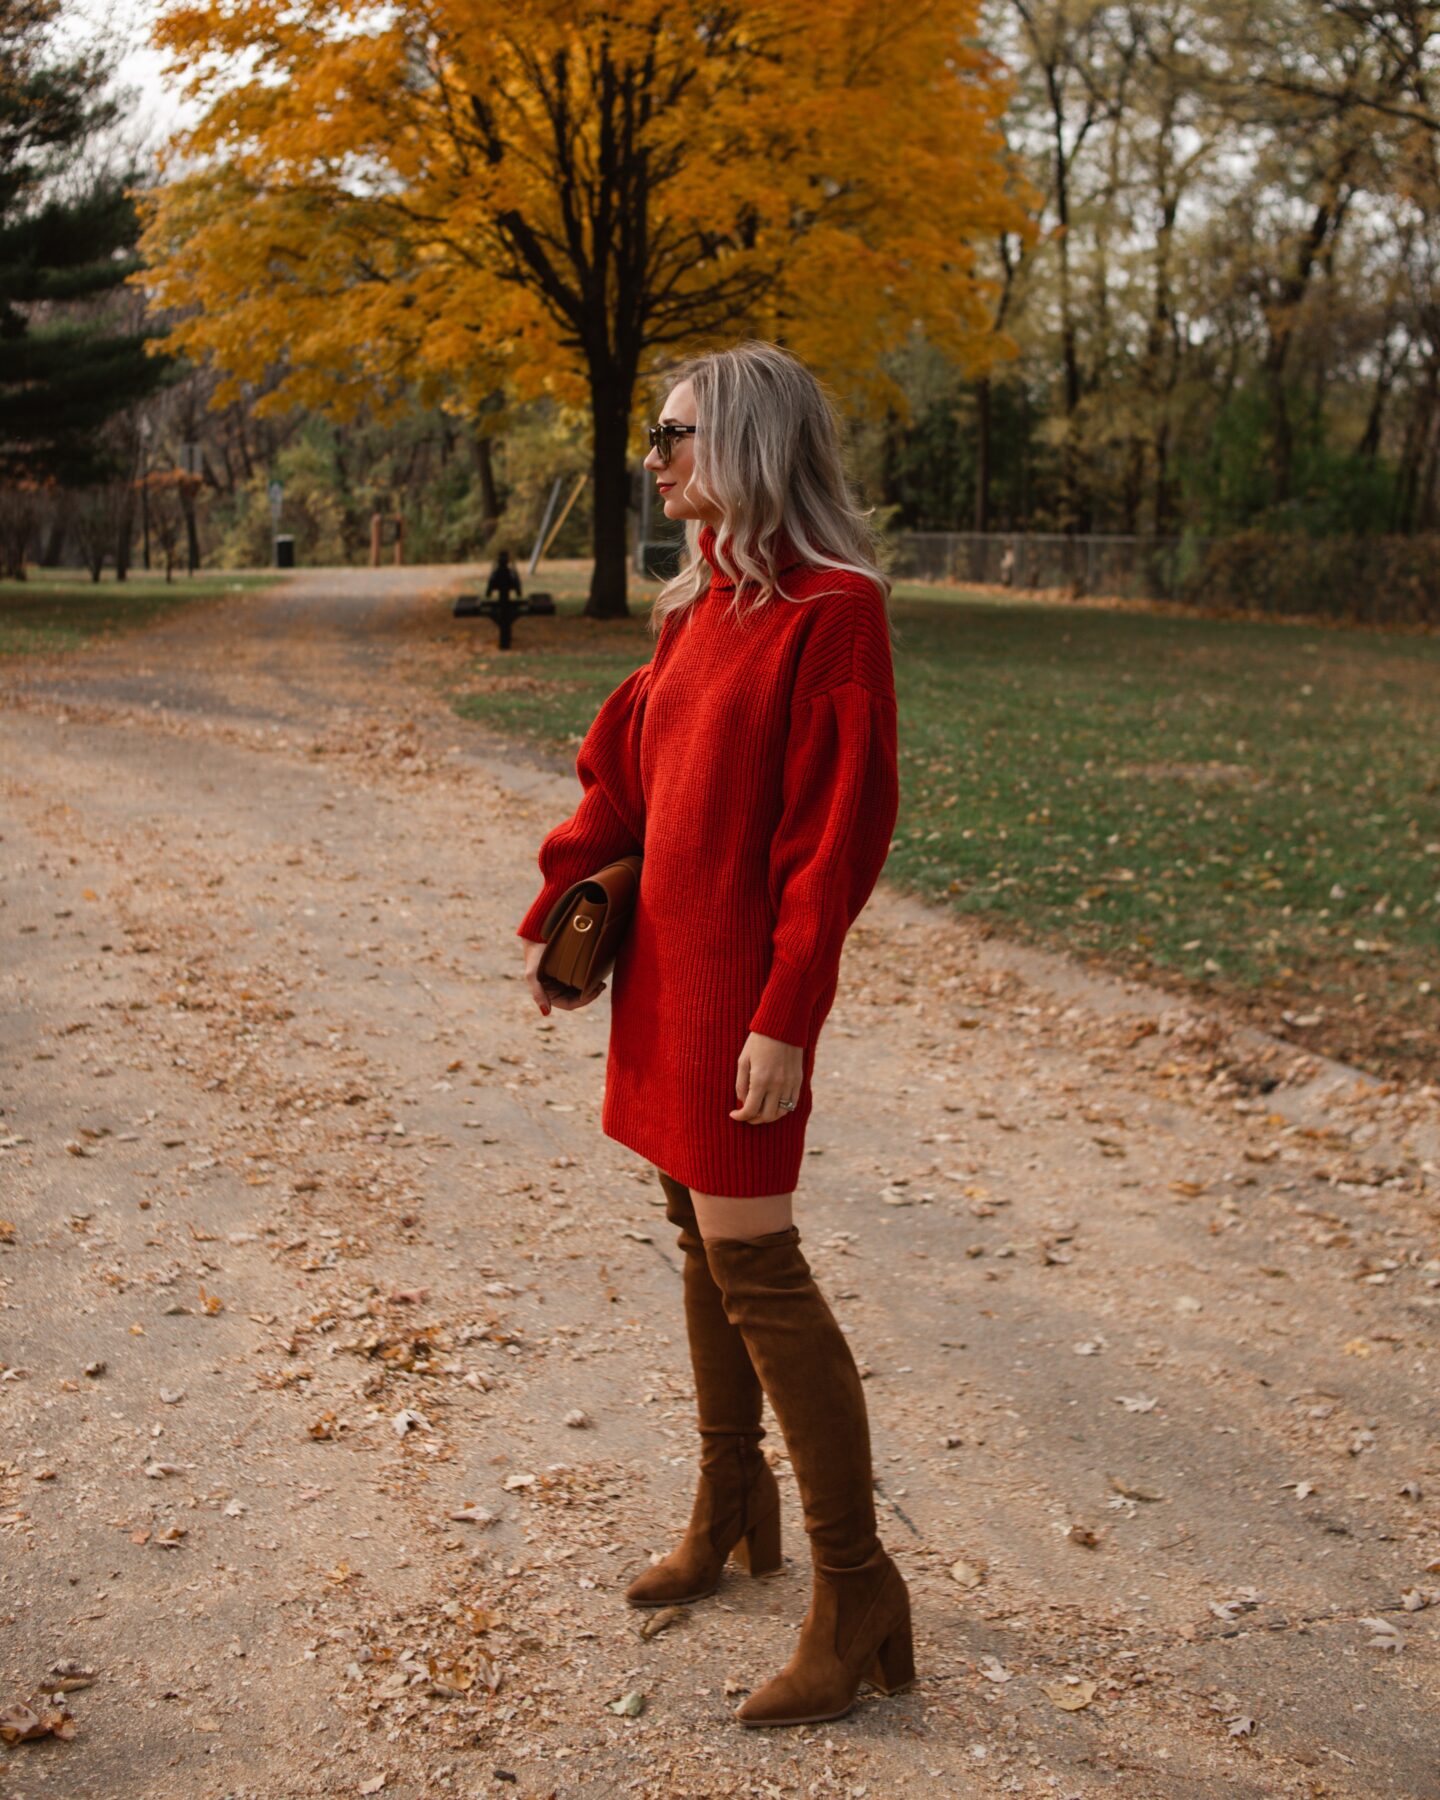 Karin Emily wears a red sweater dress from Free Assembly at Walmart and a pair of brown over the knee boots